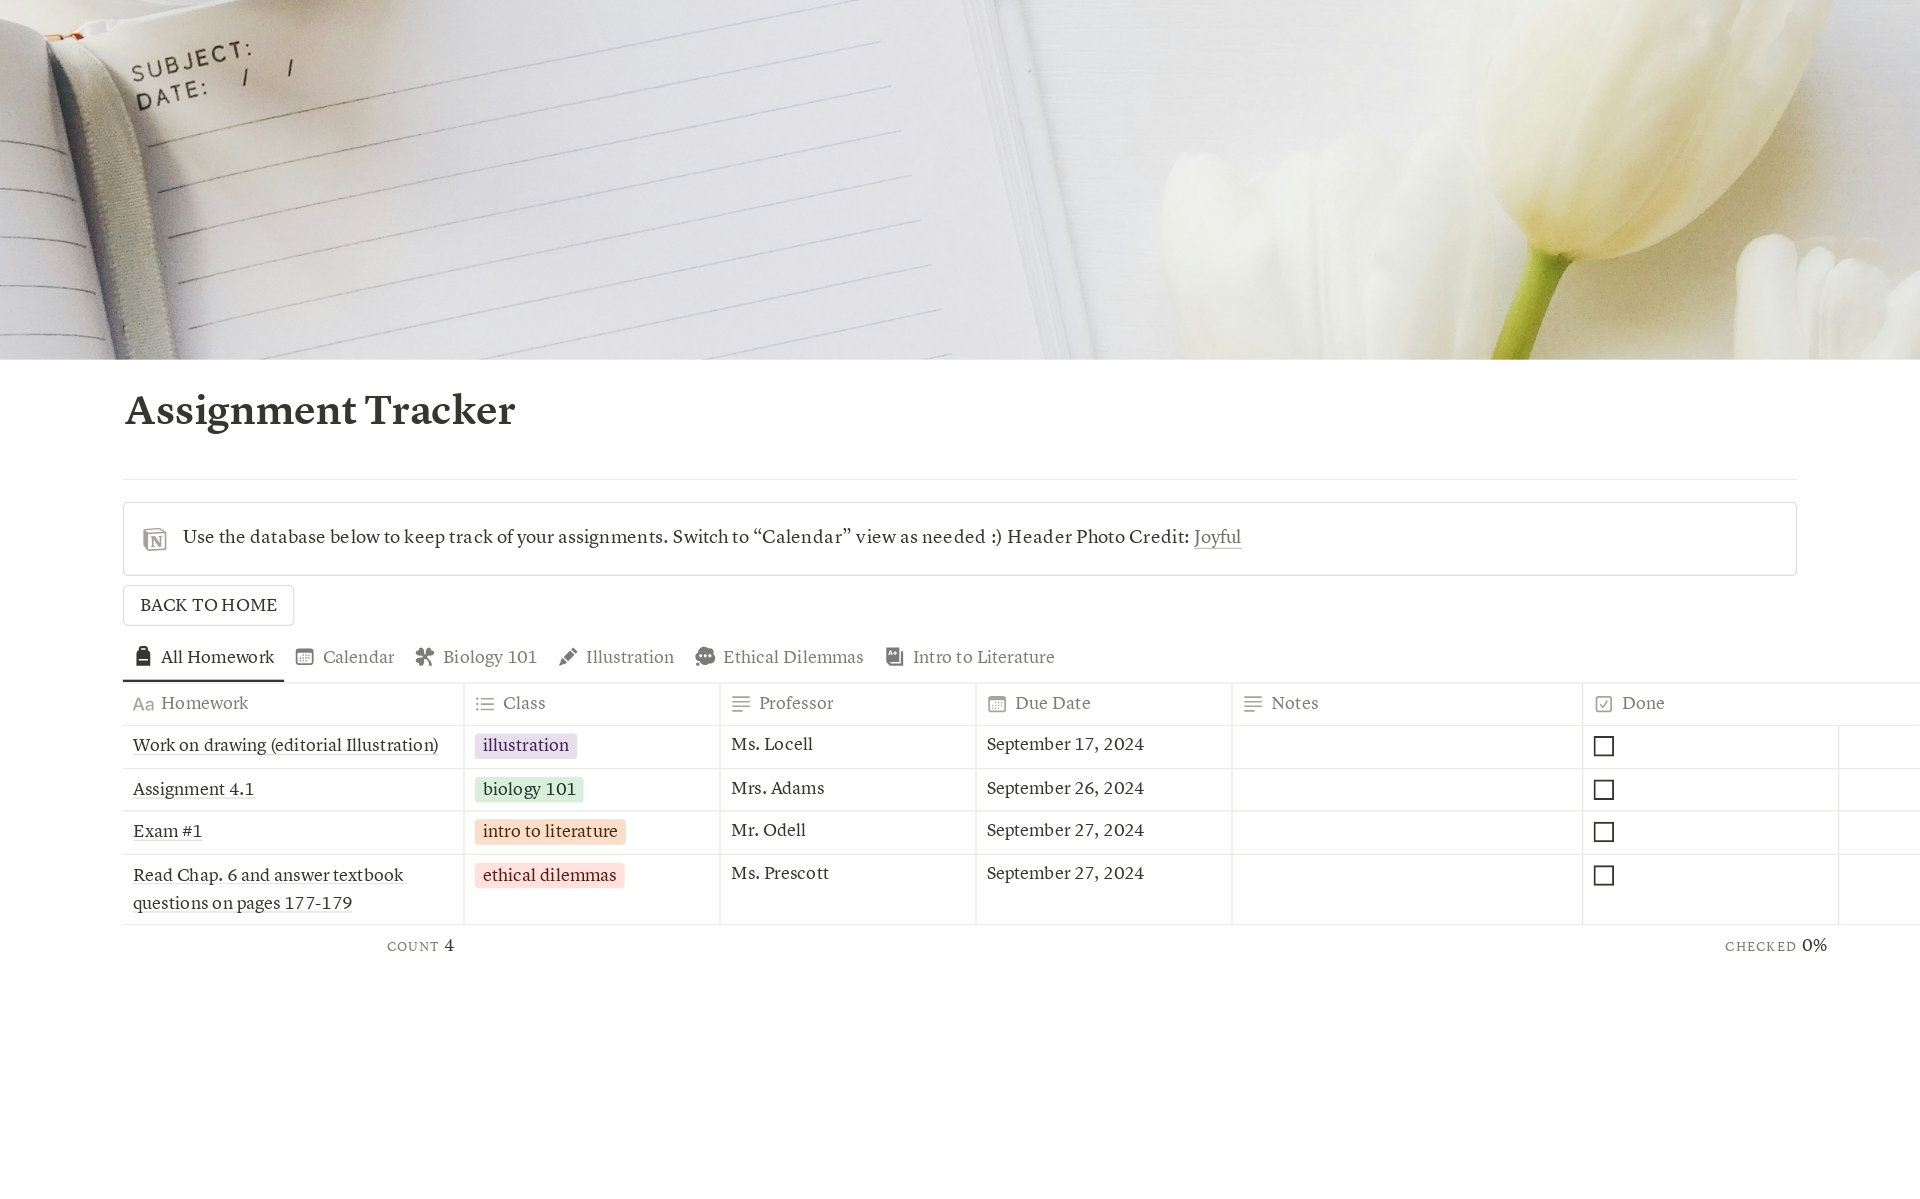 This student dashboard is designed for college students to track their assignments, manage their habits, and organize their life goals, tasks, and projects.